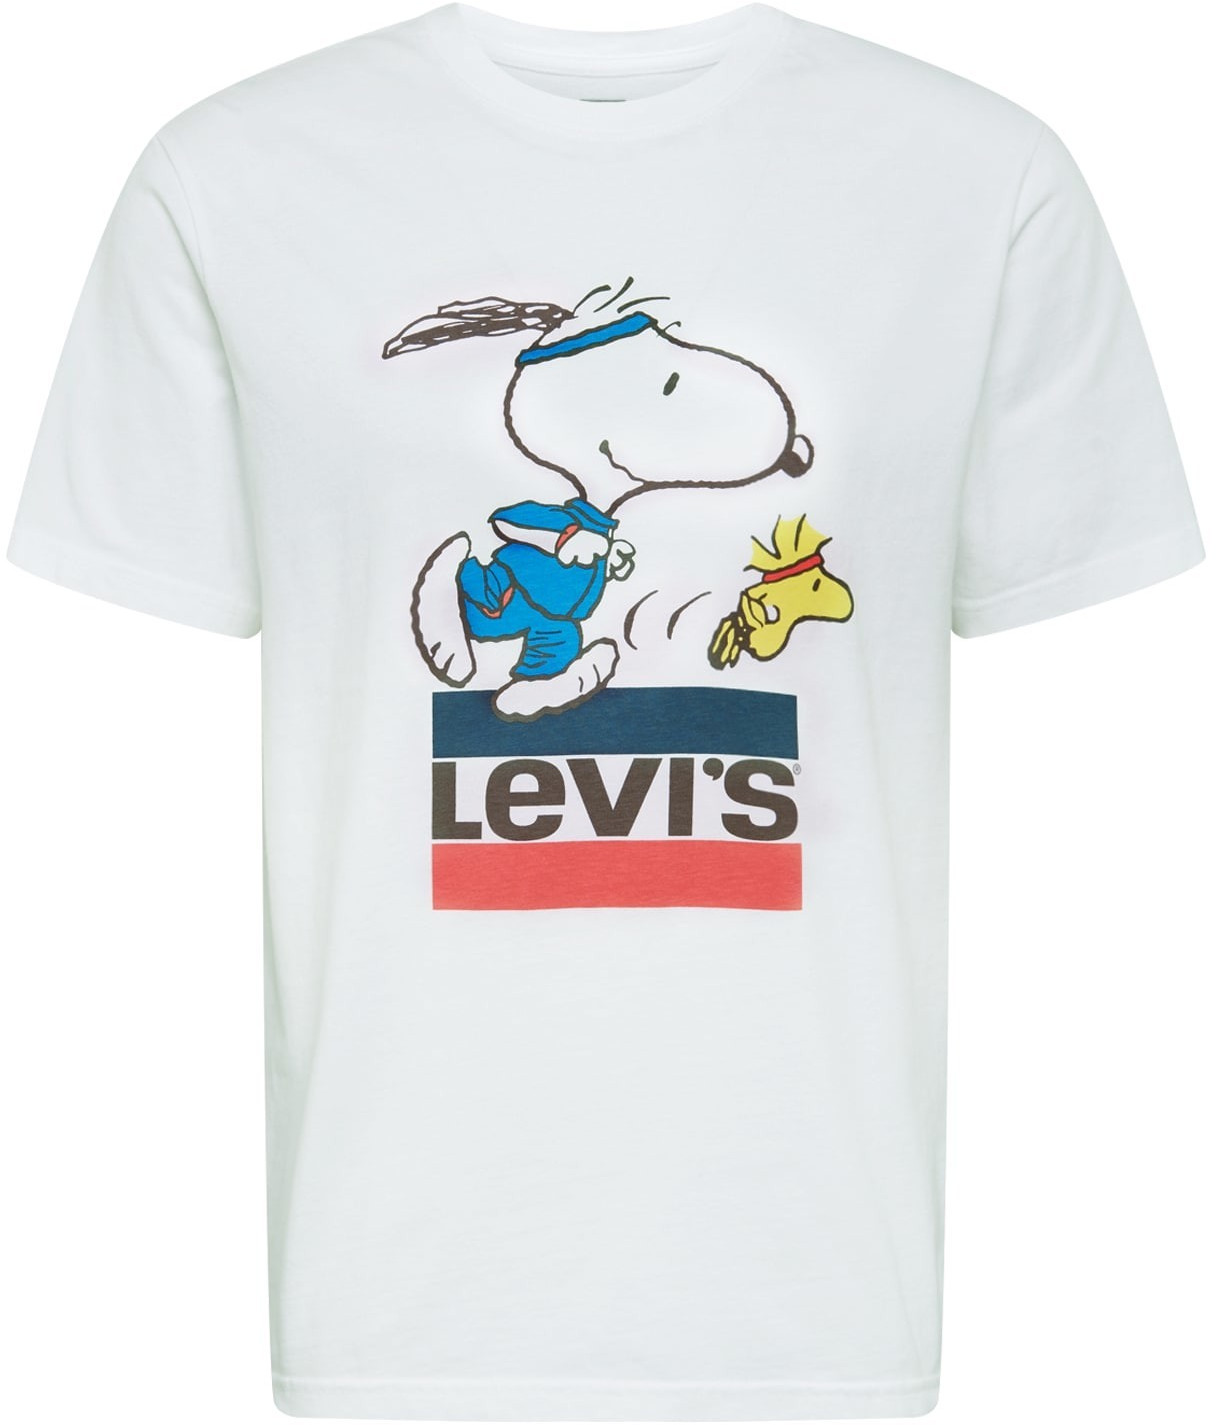 Levi's x Peanuts Relaxed Fit Tee (16143-0080) bright white